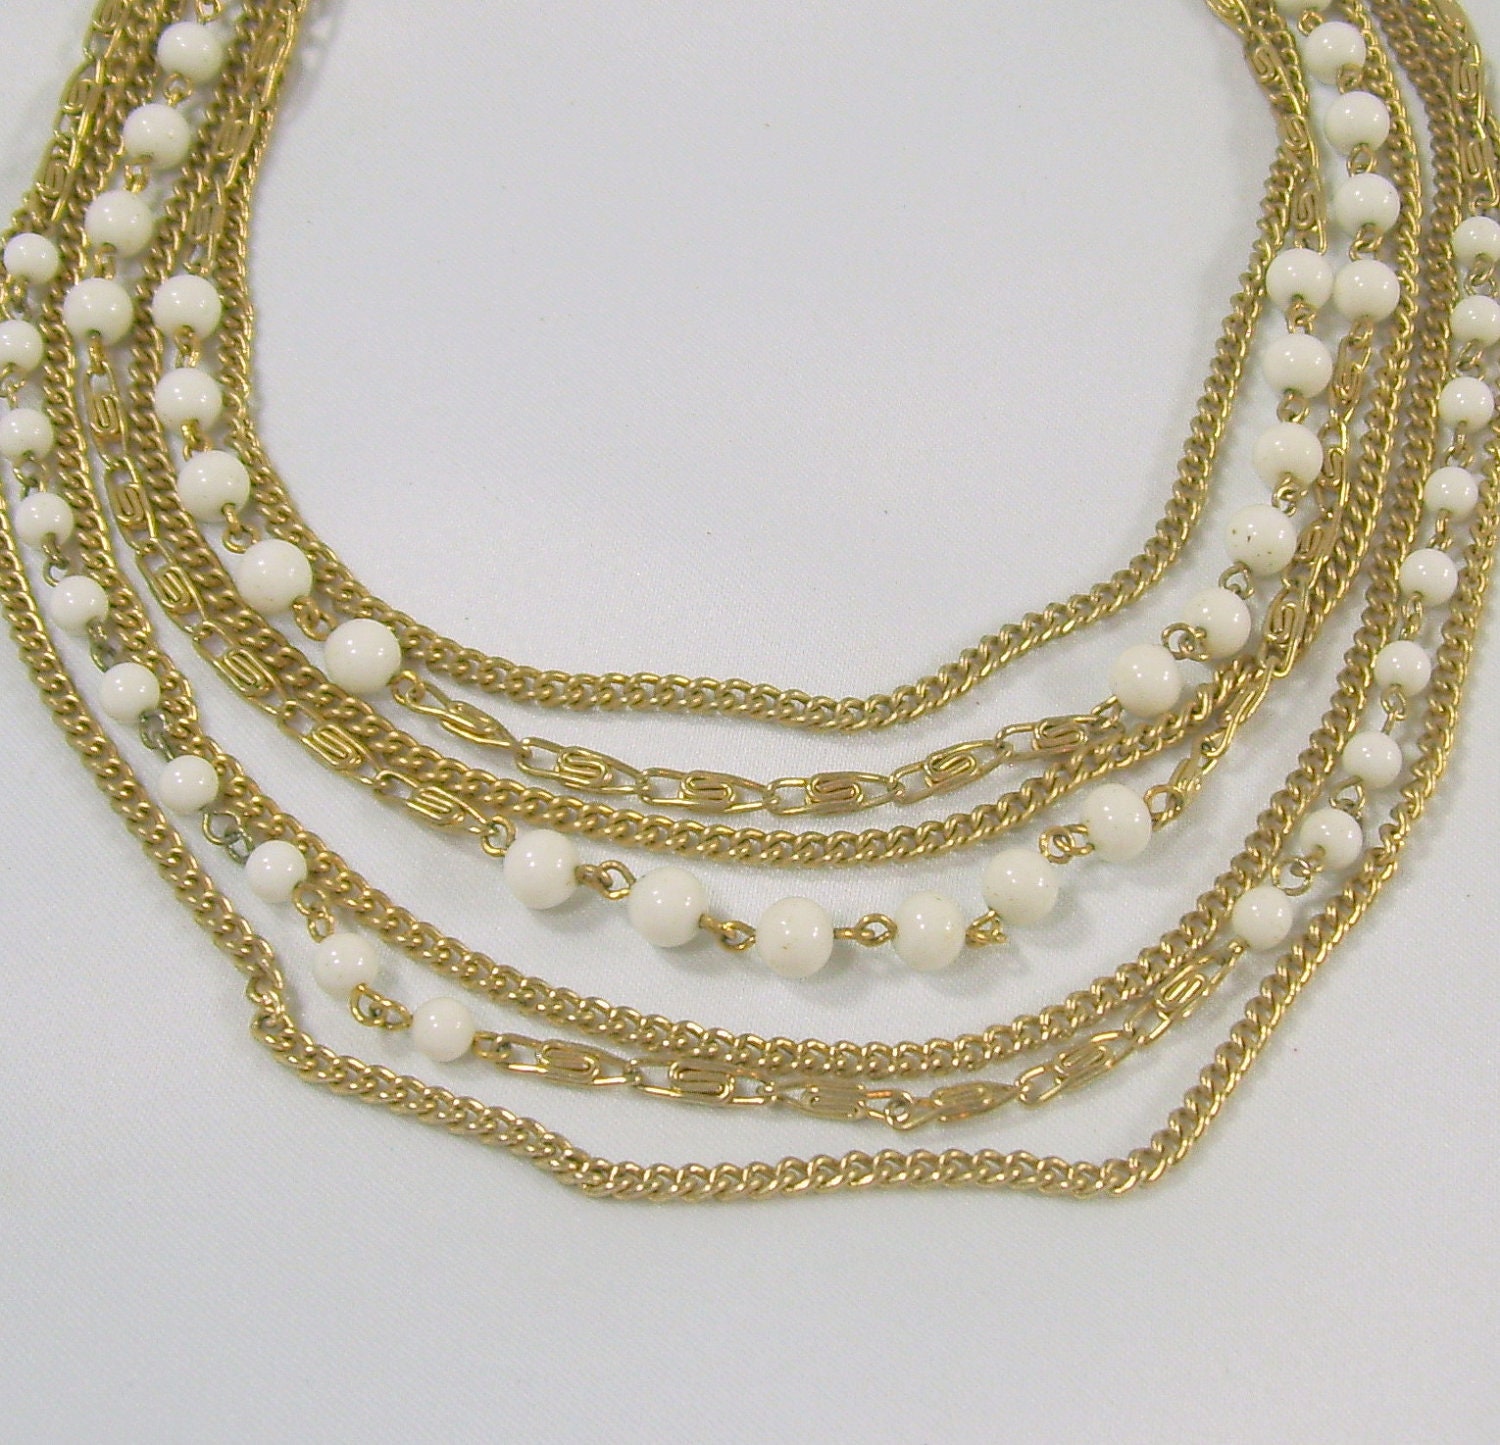 Vintage Lisner Necklace White Glass Bead Gold Tone Chain Multi